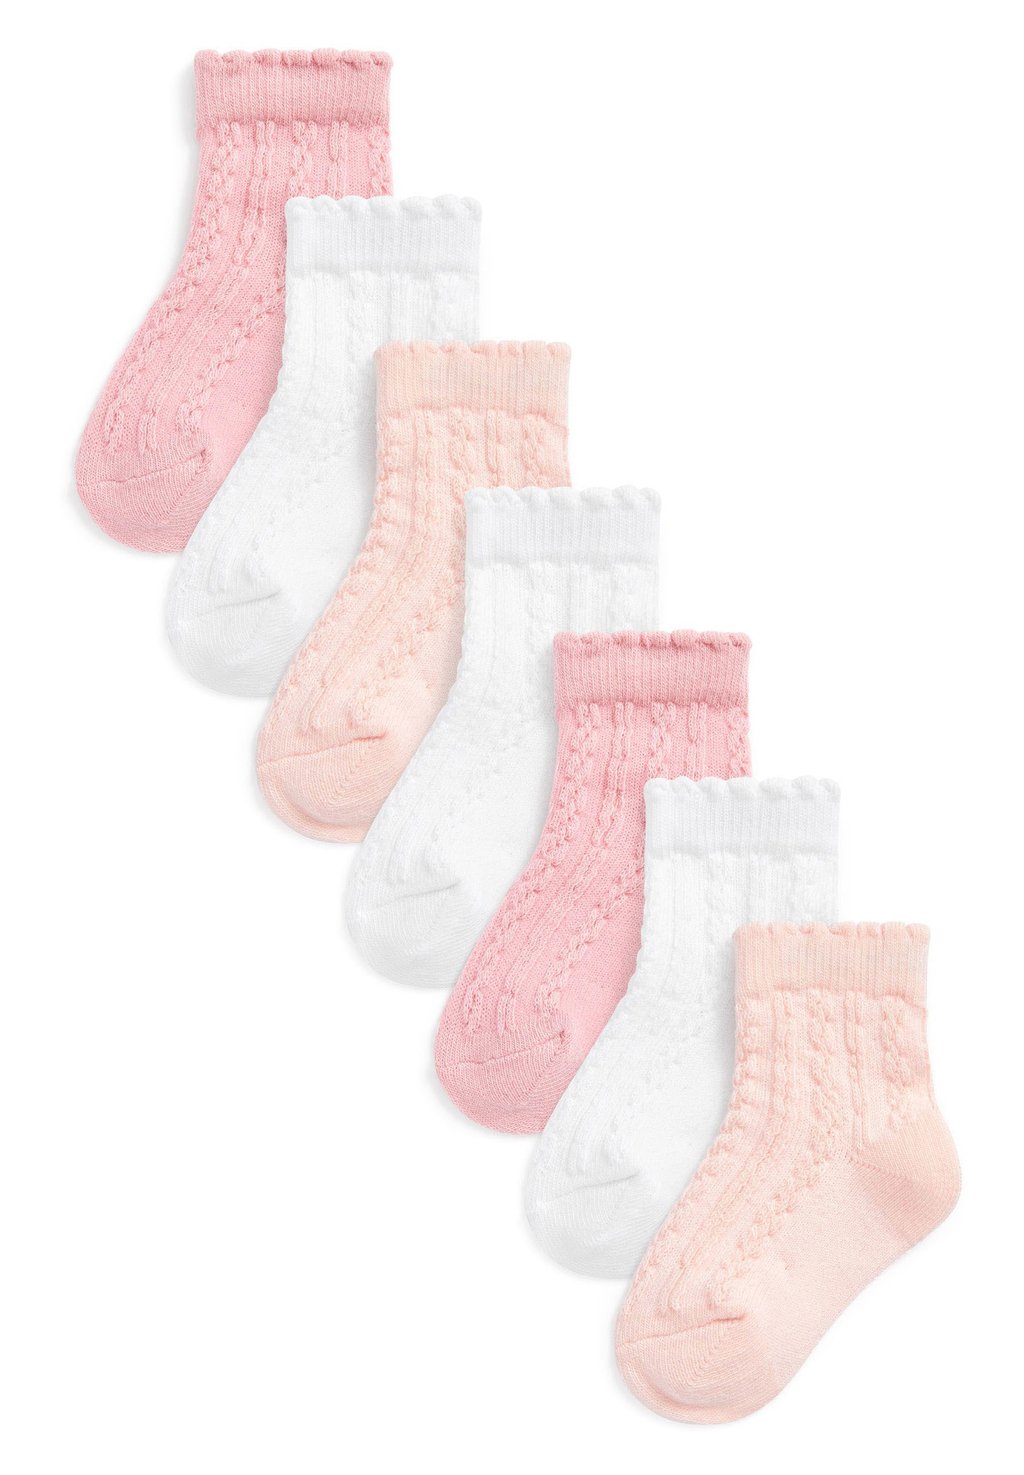 носки 7 pack next цвет pink white cable knit Носки 7 PACK Next, цвет pink/white cable knit